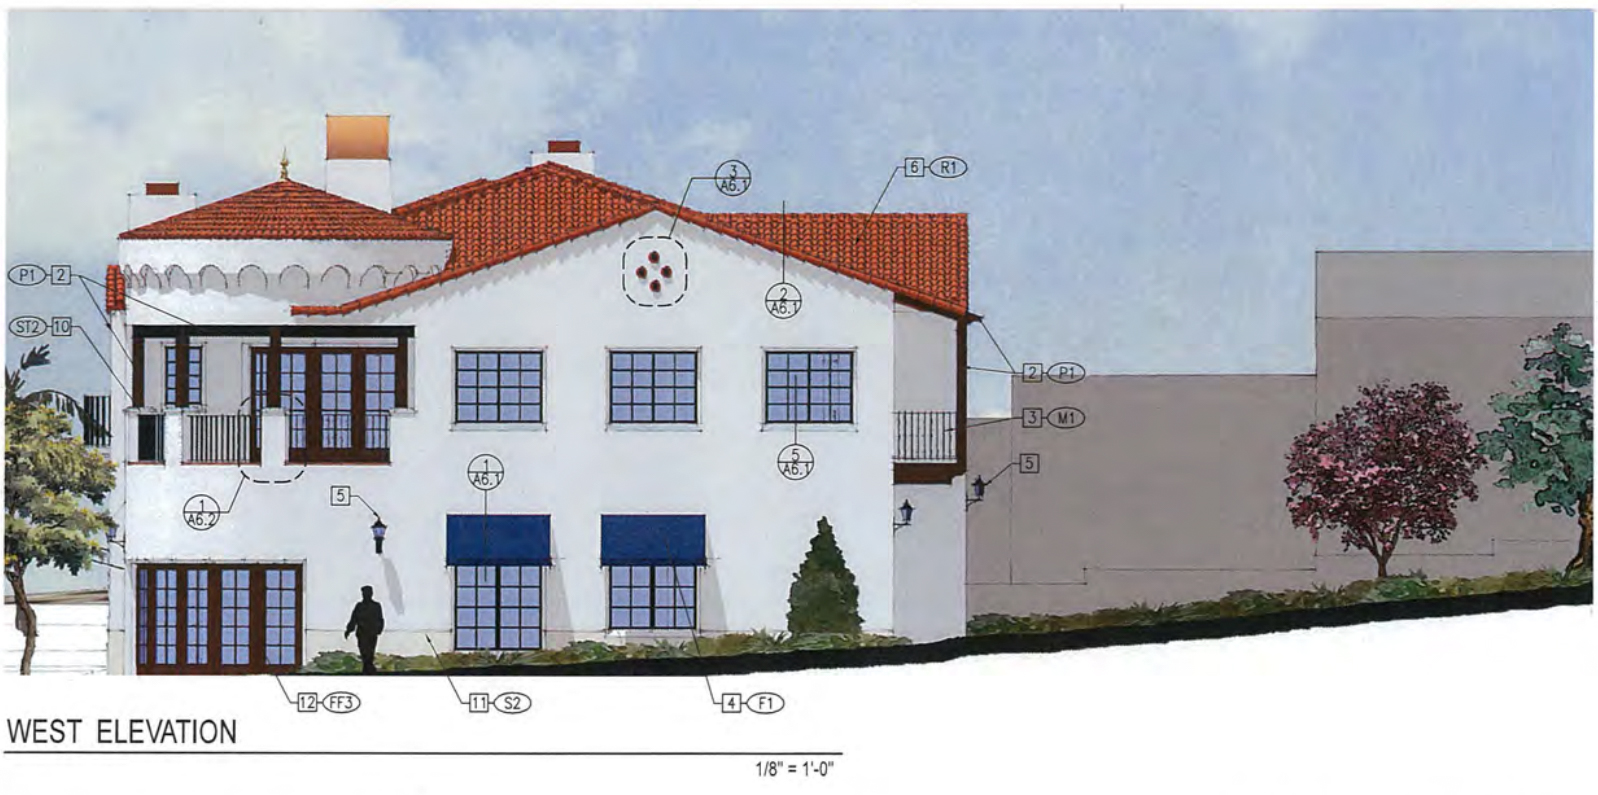 1571 East Main Street. Rendering by J.E. Armstrong Architects Inc. 